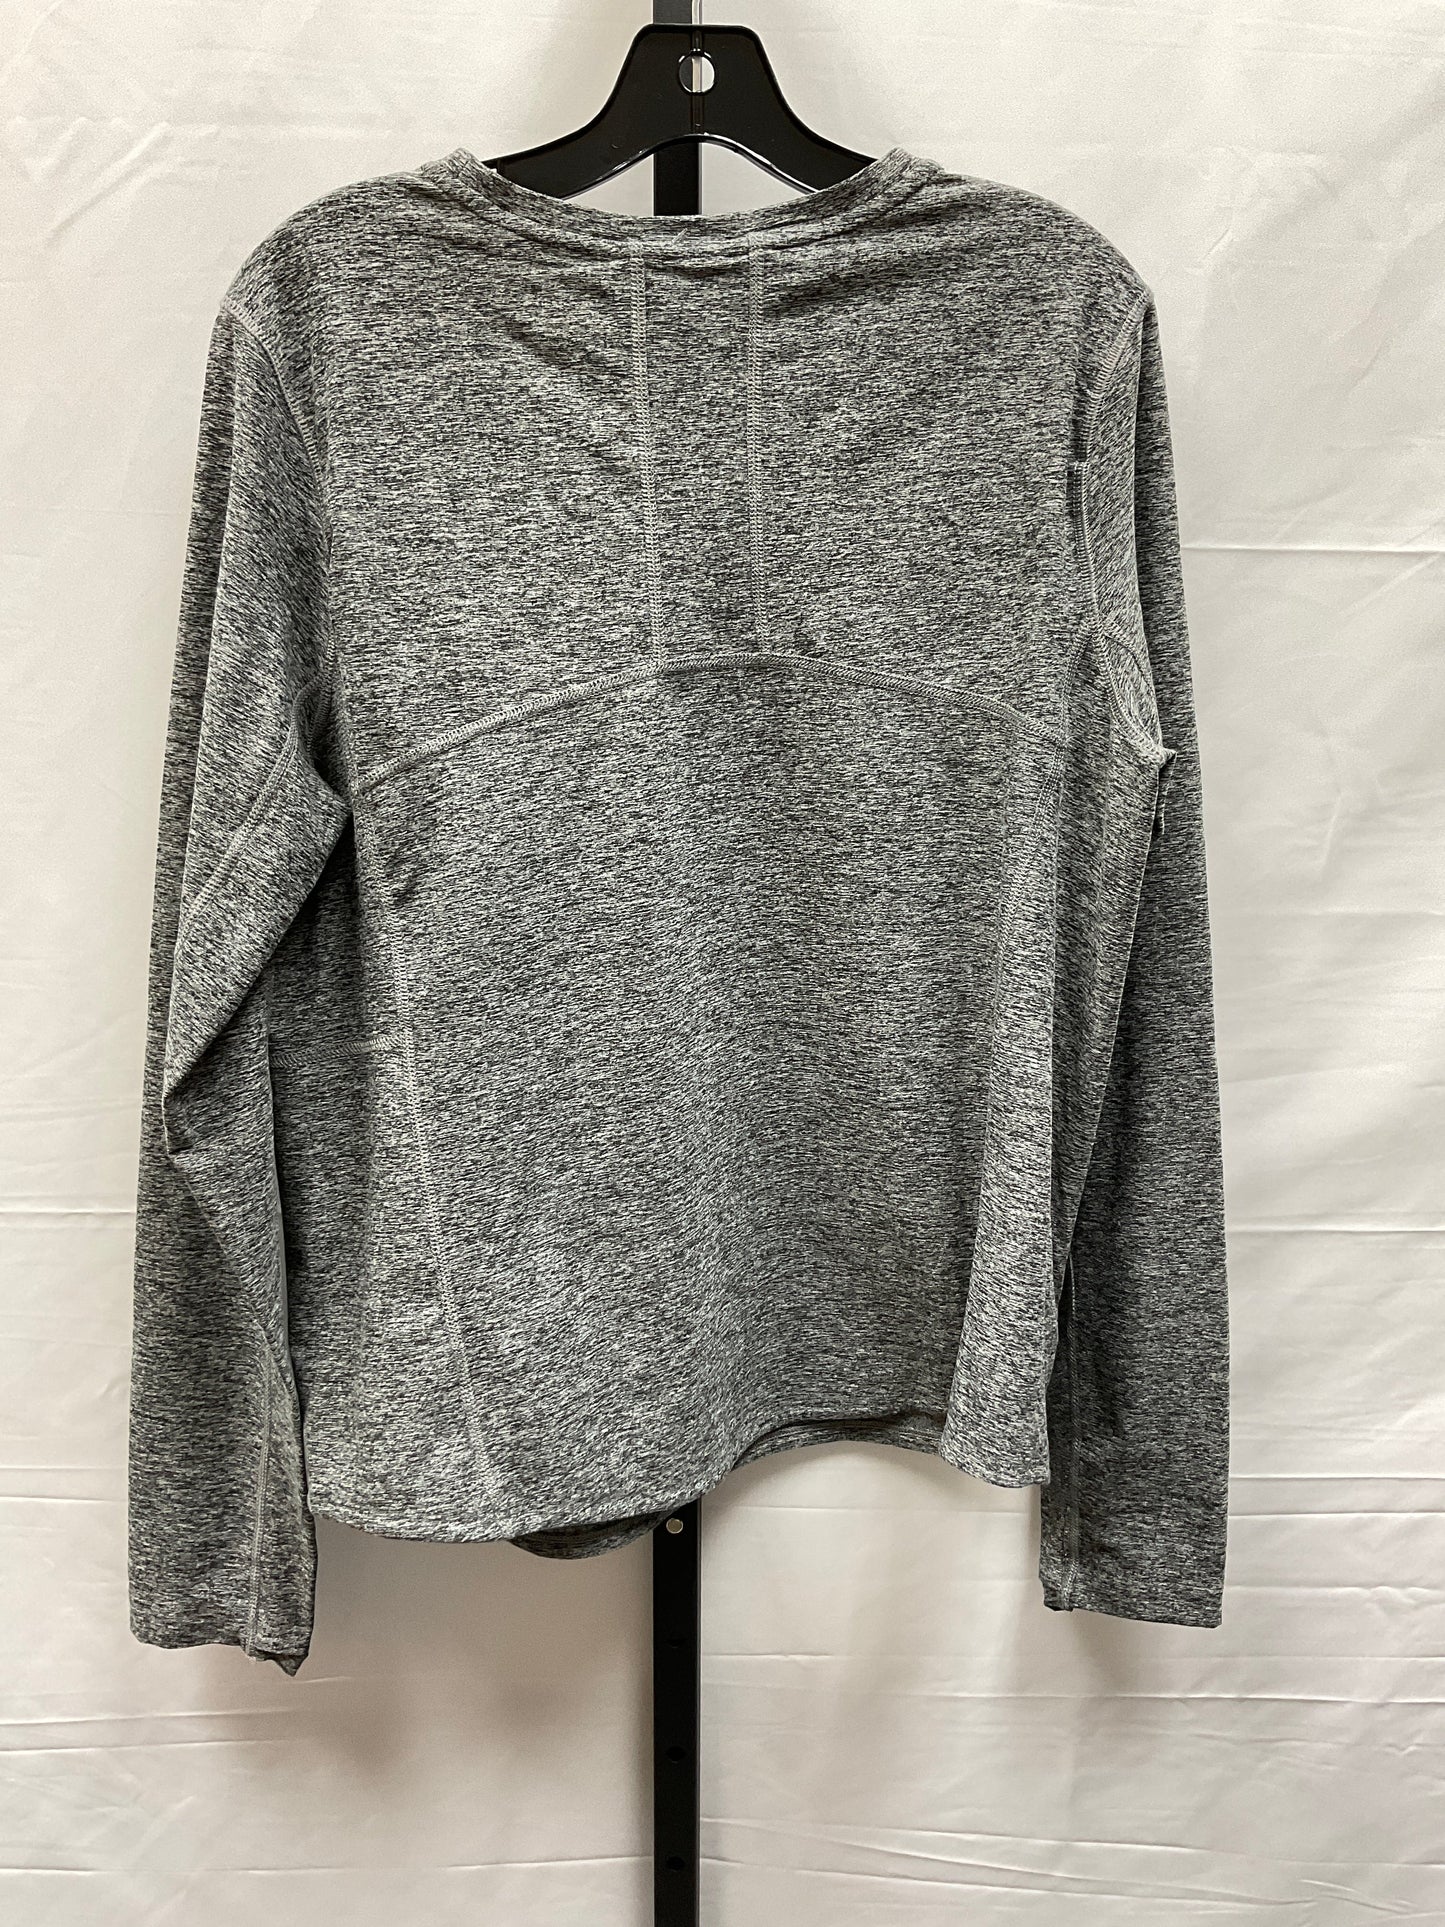 Grey Athletic Top Long Sleeve Crewneck Duluth Trading, Size Xl